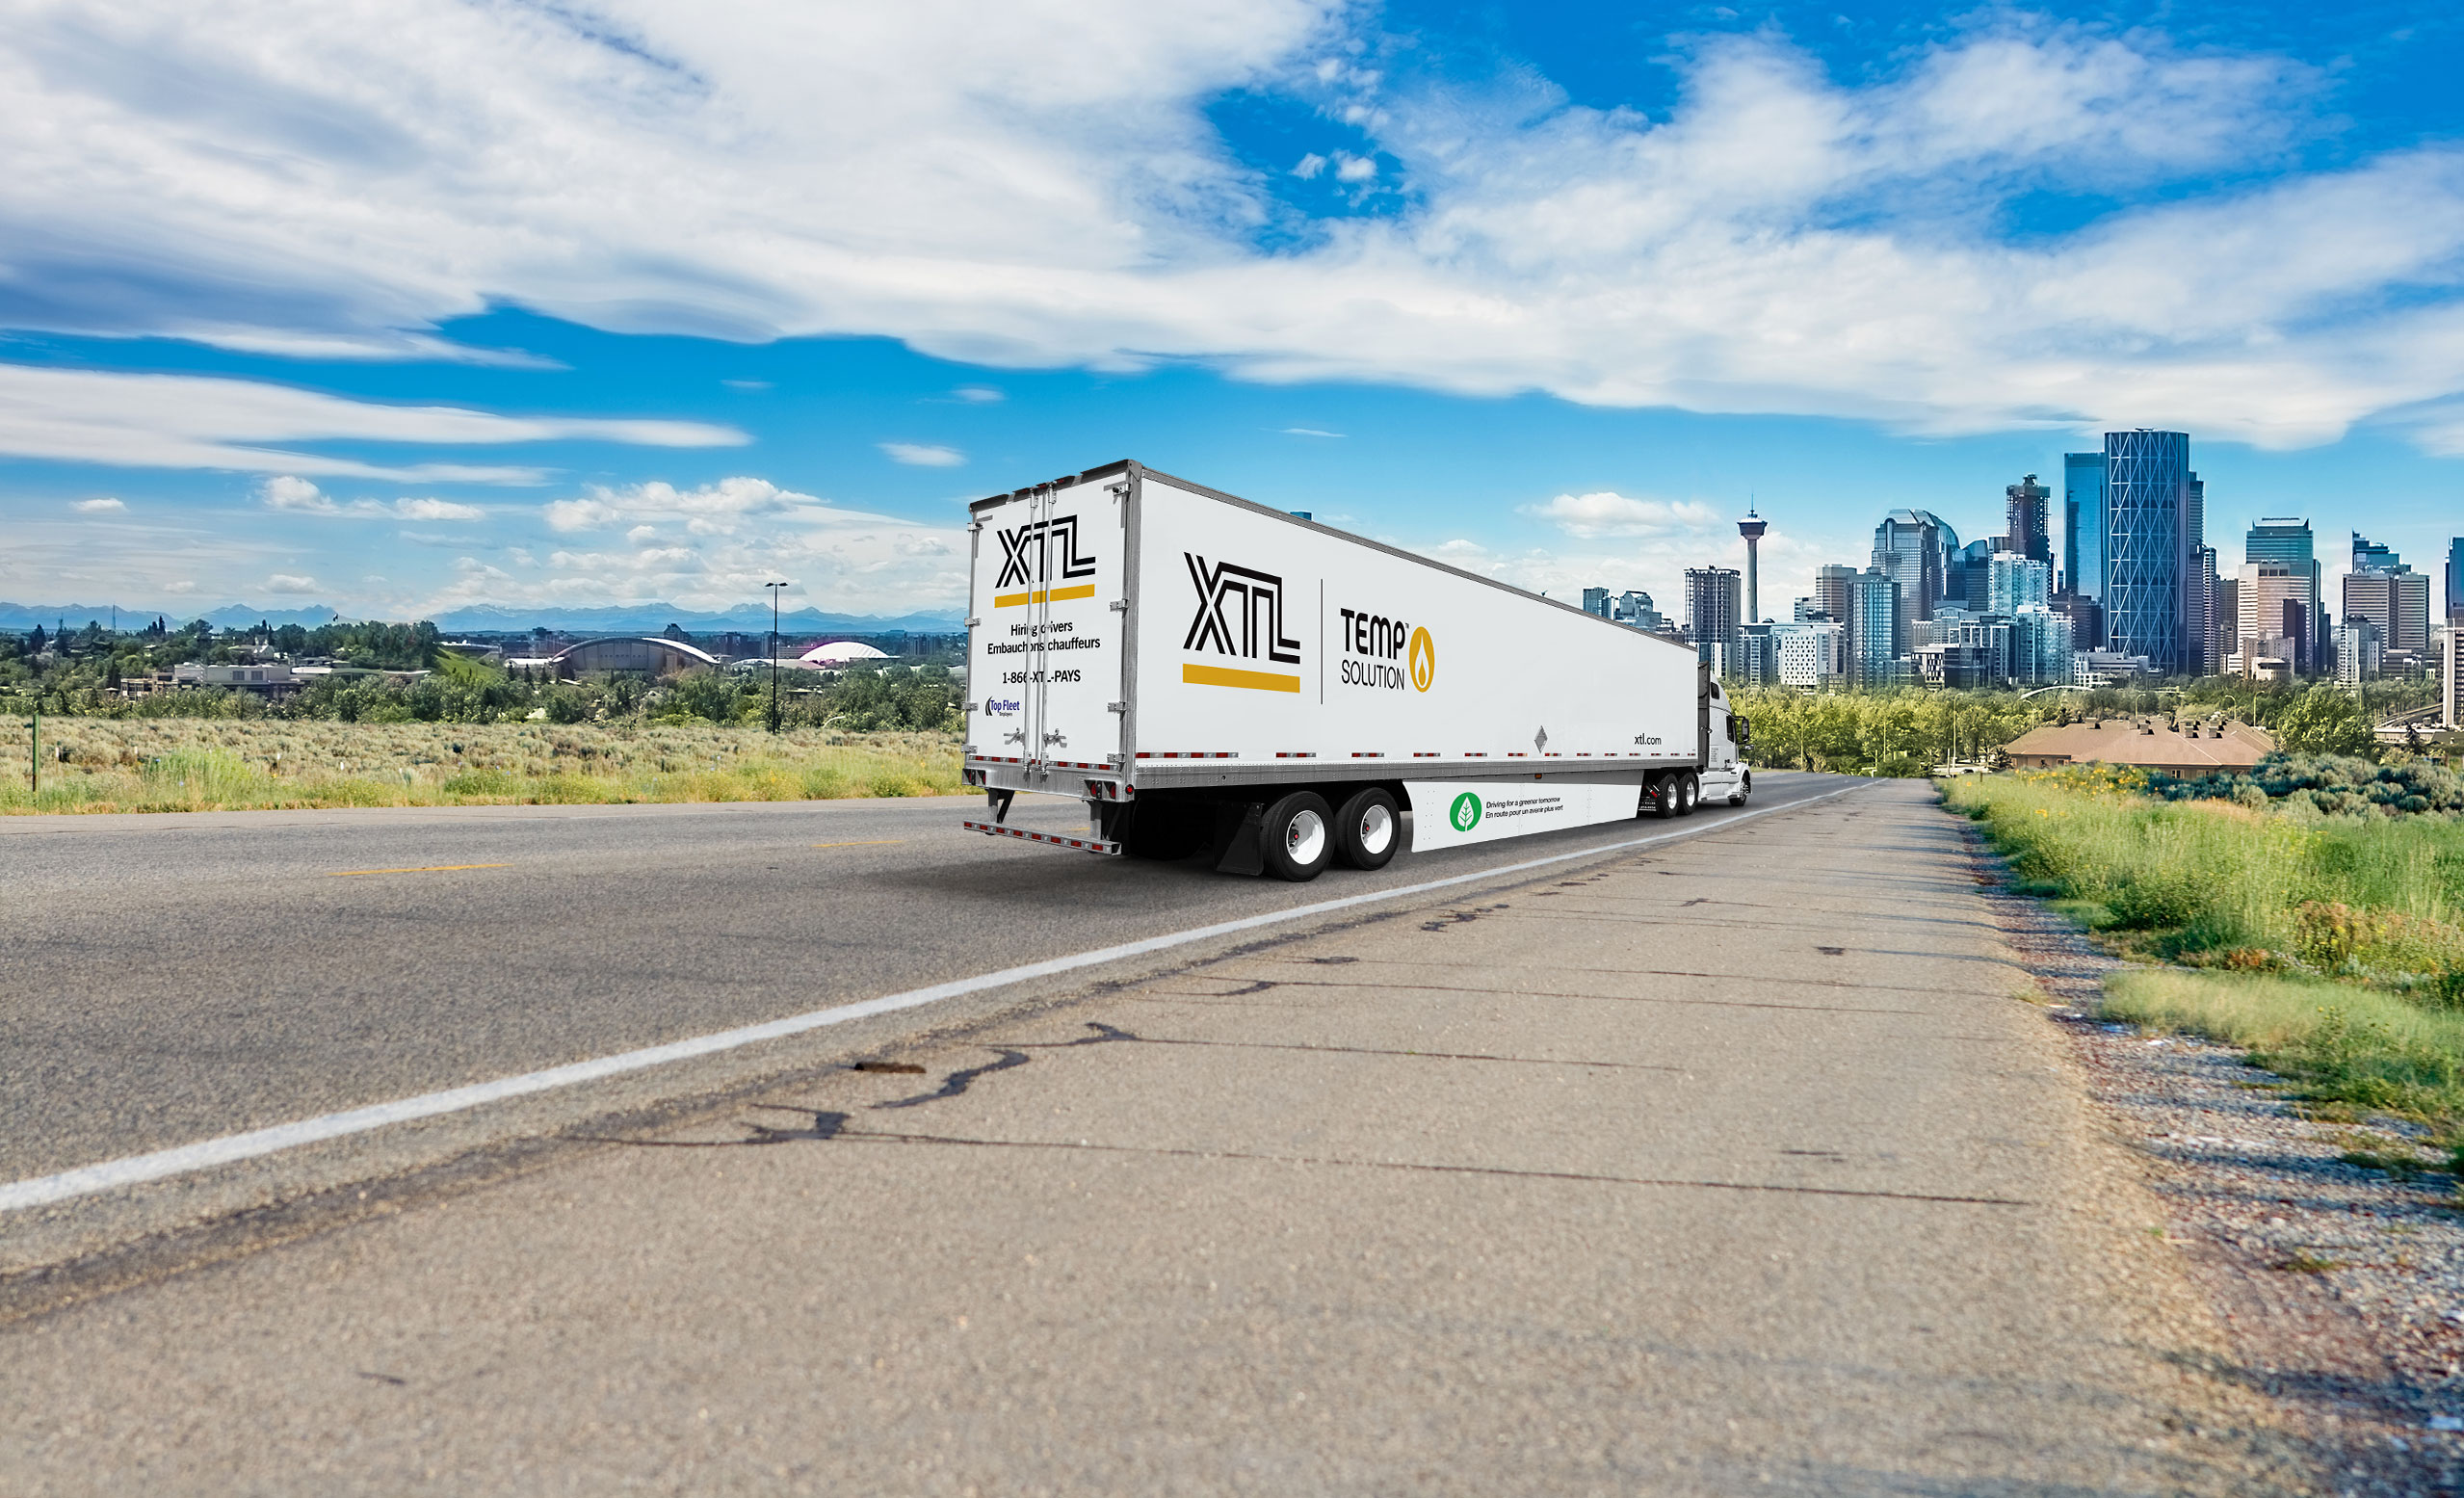 XTL transport truck and trailer driving on road, with city of Calgary in the background